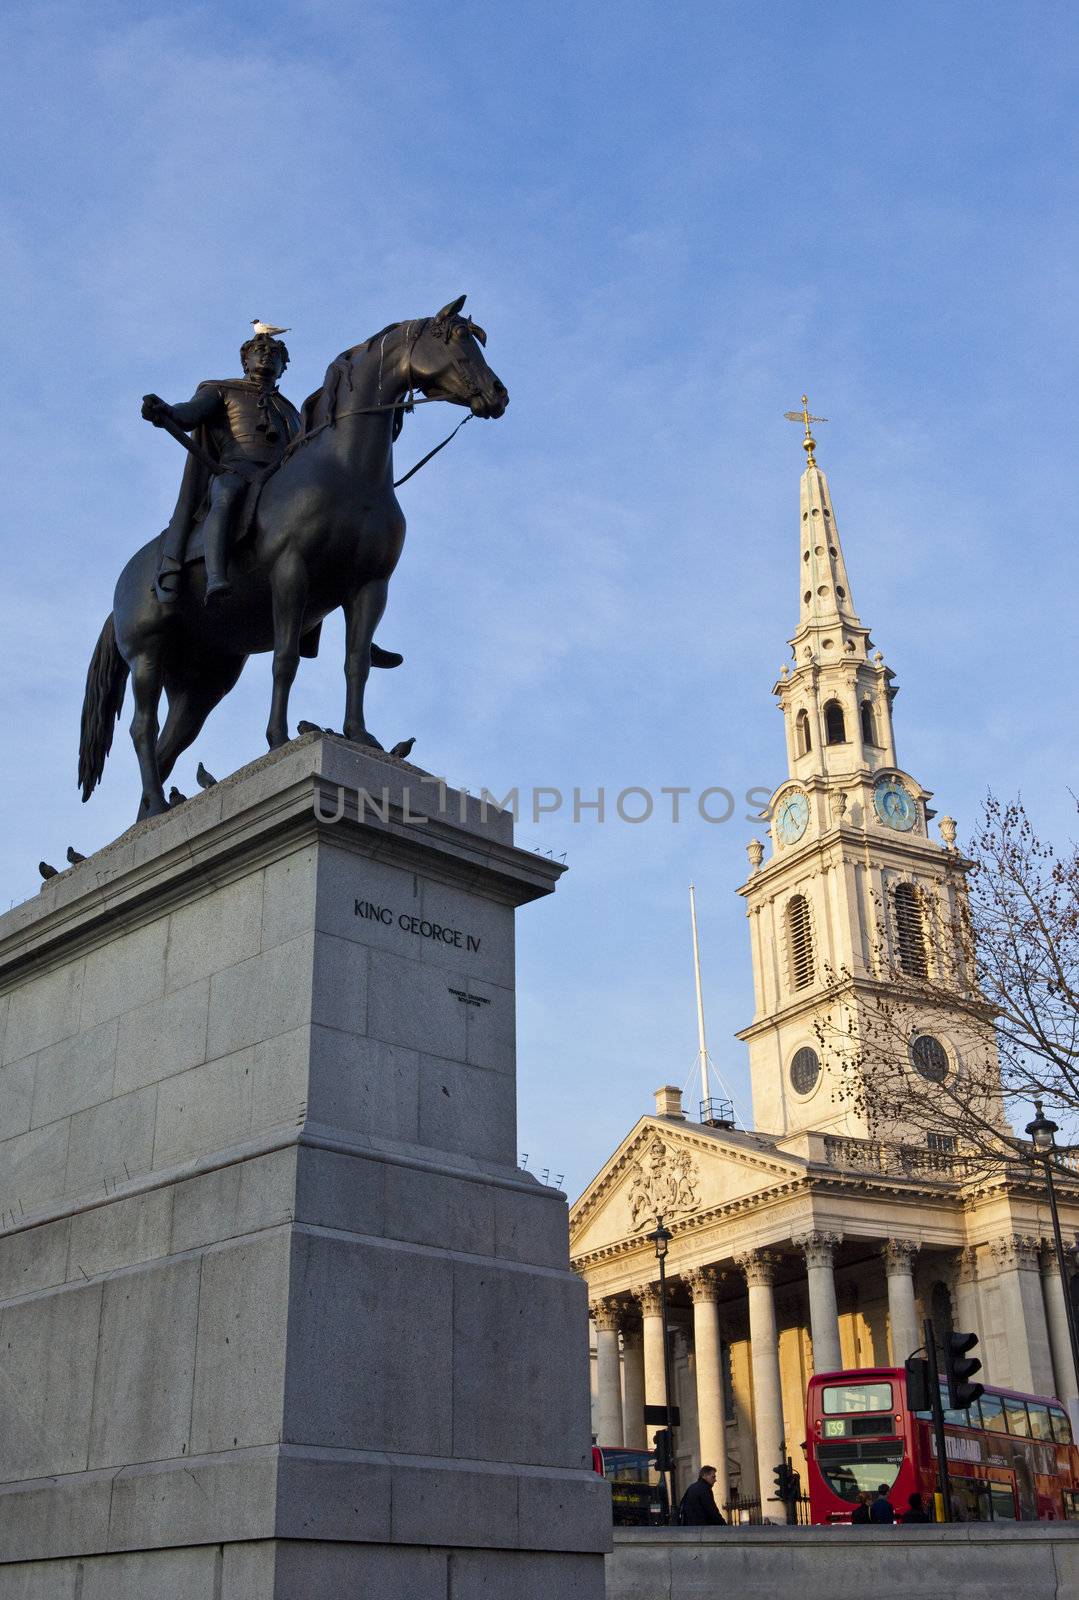 King George IV Statue and St Martin-in-the-Fields Church in London.